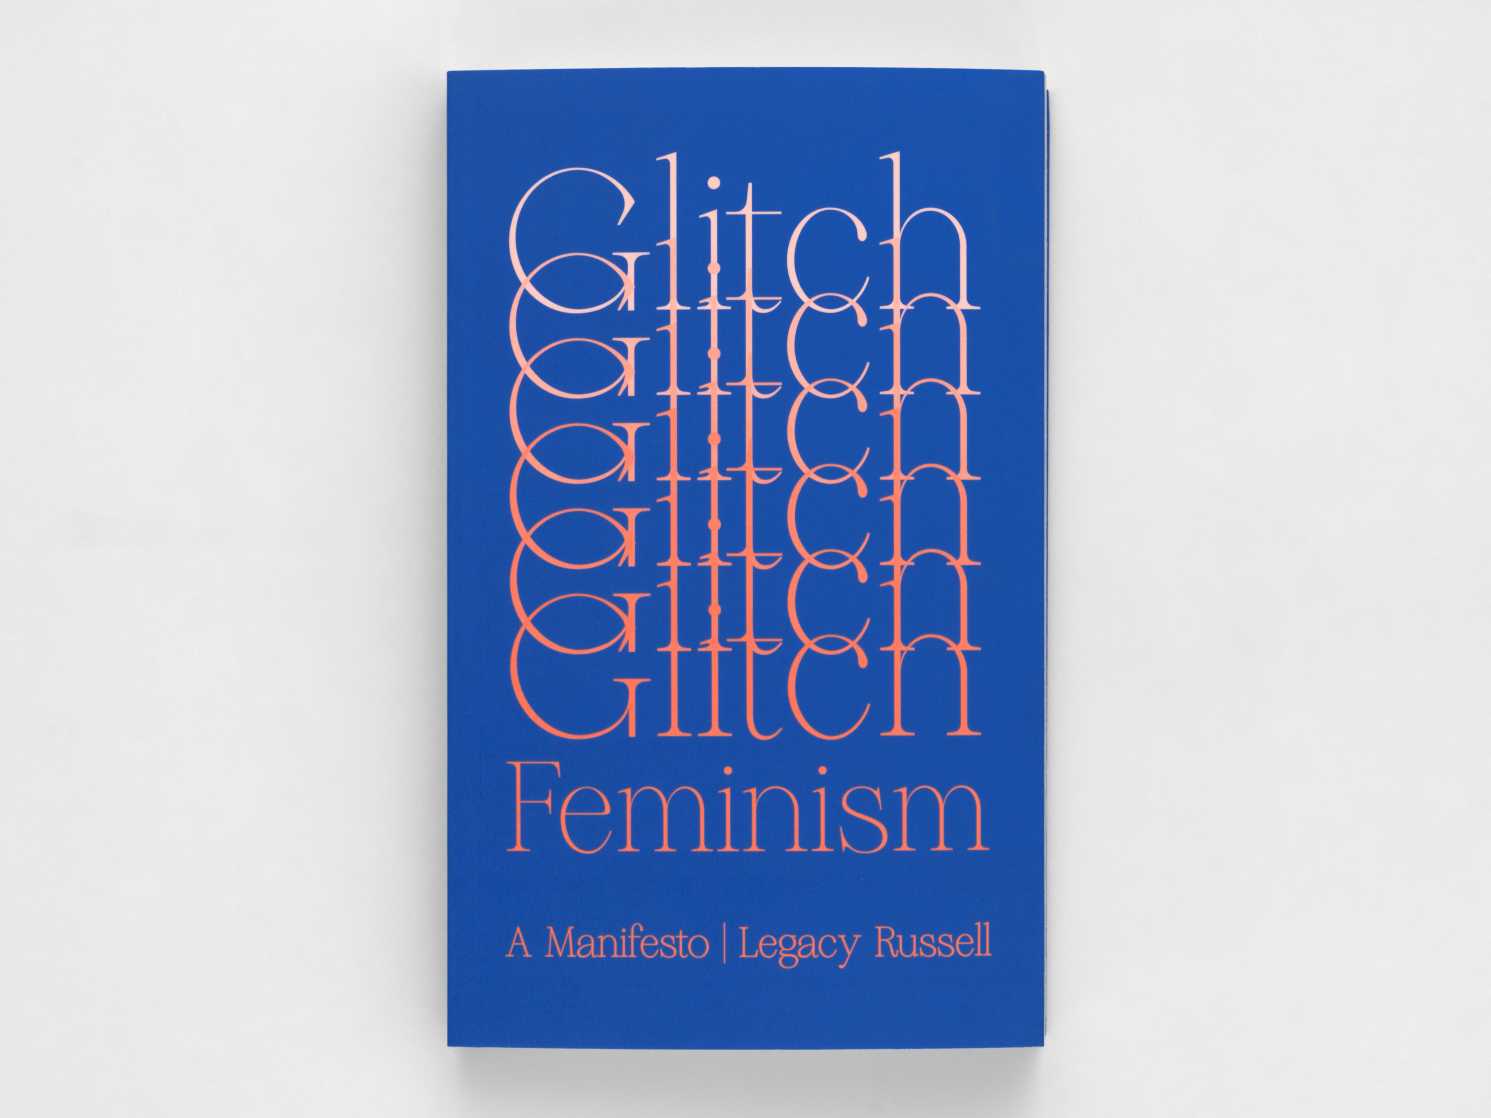 Tall dark blue book with the word "Glitch" in a repeating pattern, sliding from the top of the page to just above the bottom. The word "Feminism" is just below this followed by "A Manifesto" and the author, Legacy Russell's name. The text is printed in a white to peach gradient.